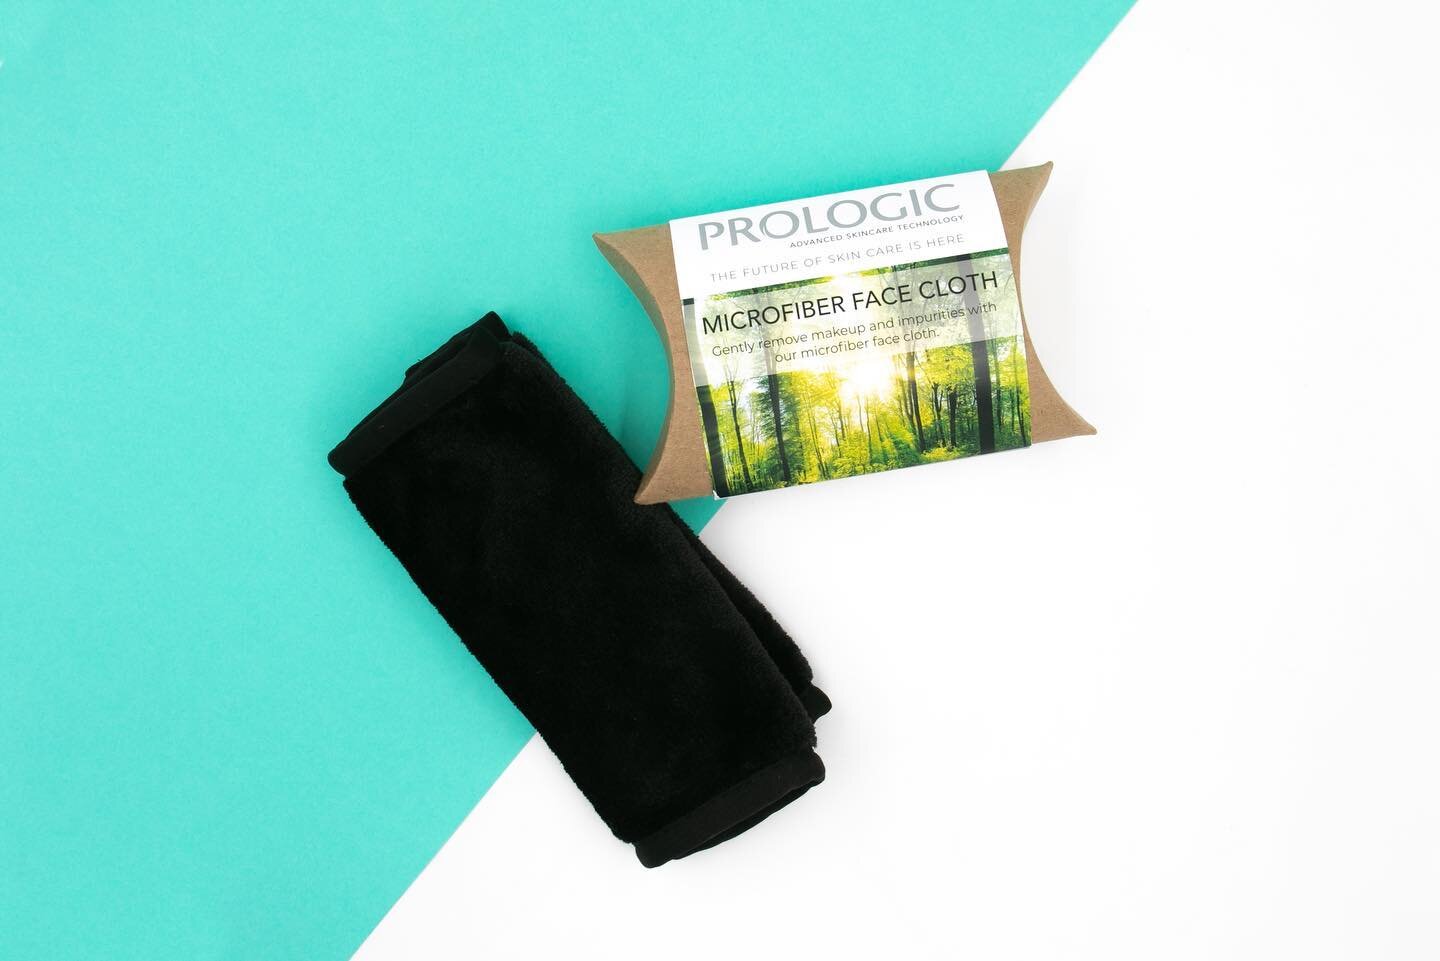 Stuck for a secret Santa? We have you covered. Our beautiful Microfiber Face Cloth is the perfect pressie! #prologic #prologicskincare